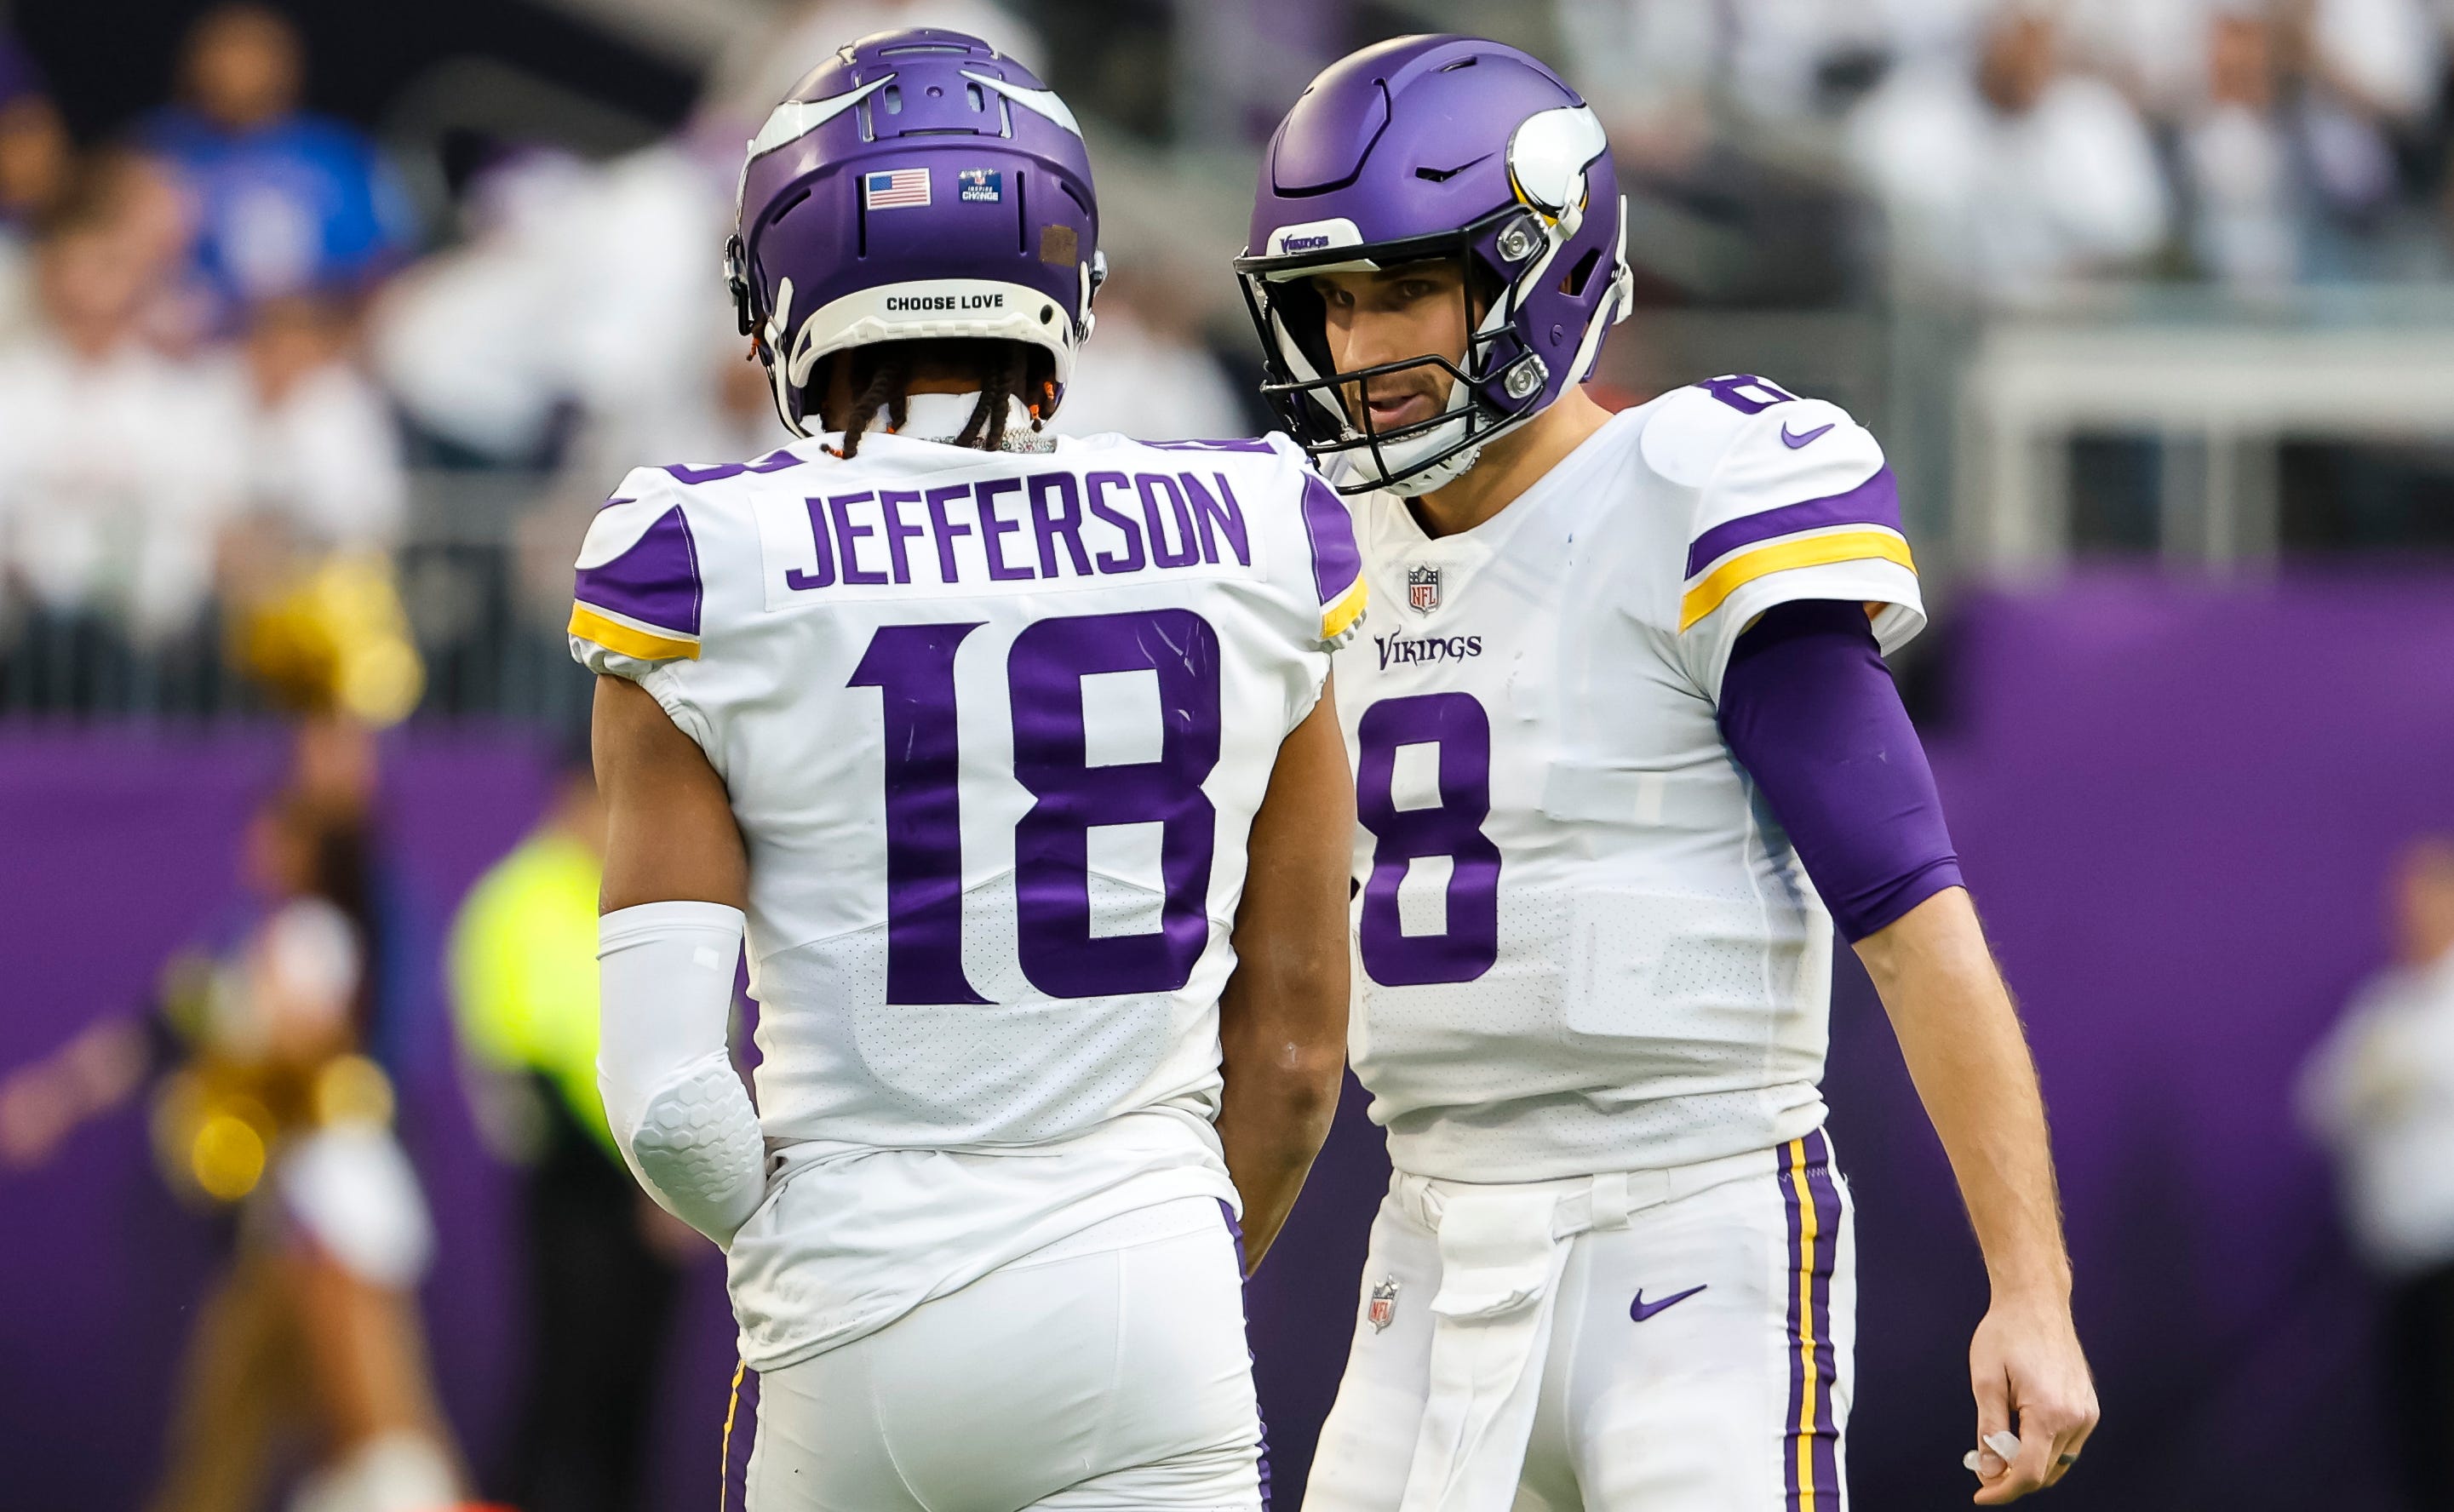 Podcast: The Minnesota Vikings enigma - by Tyler Dunne